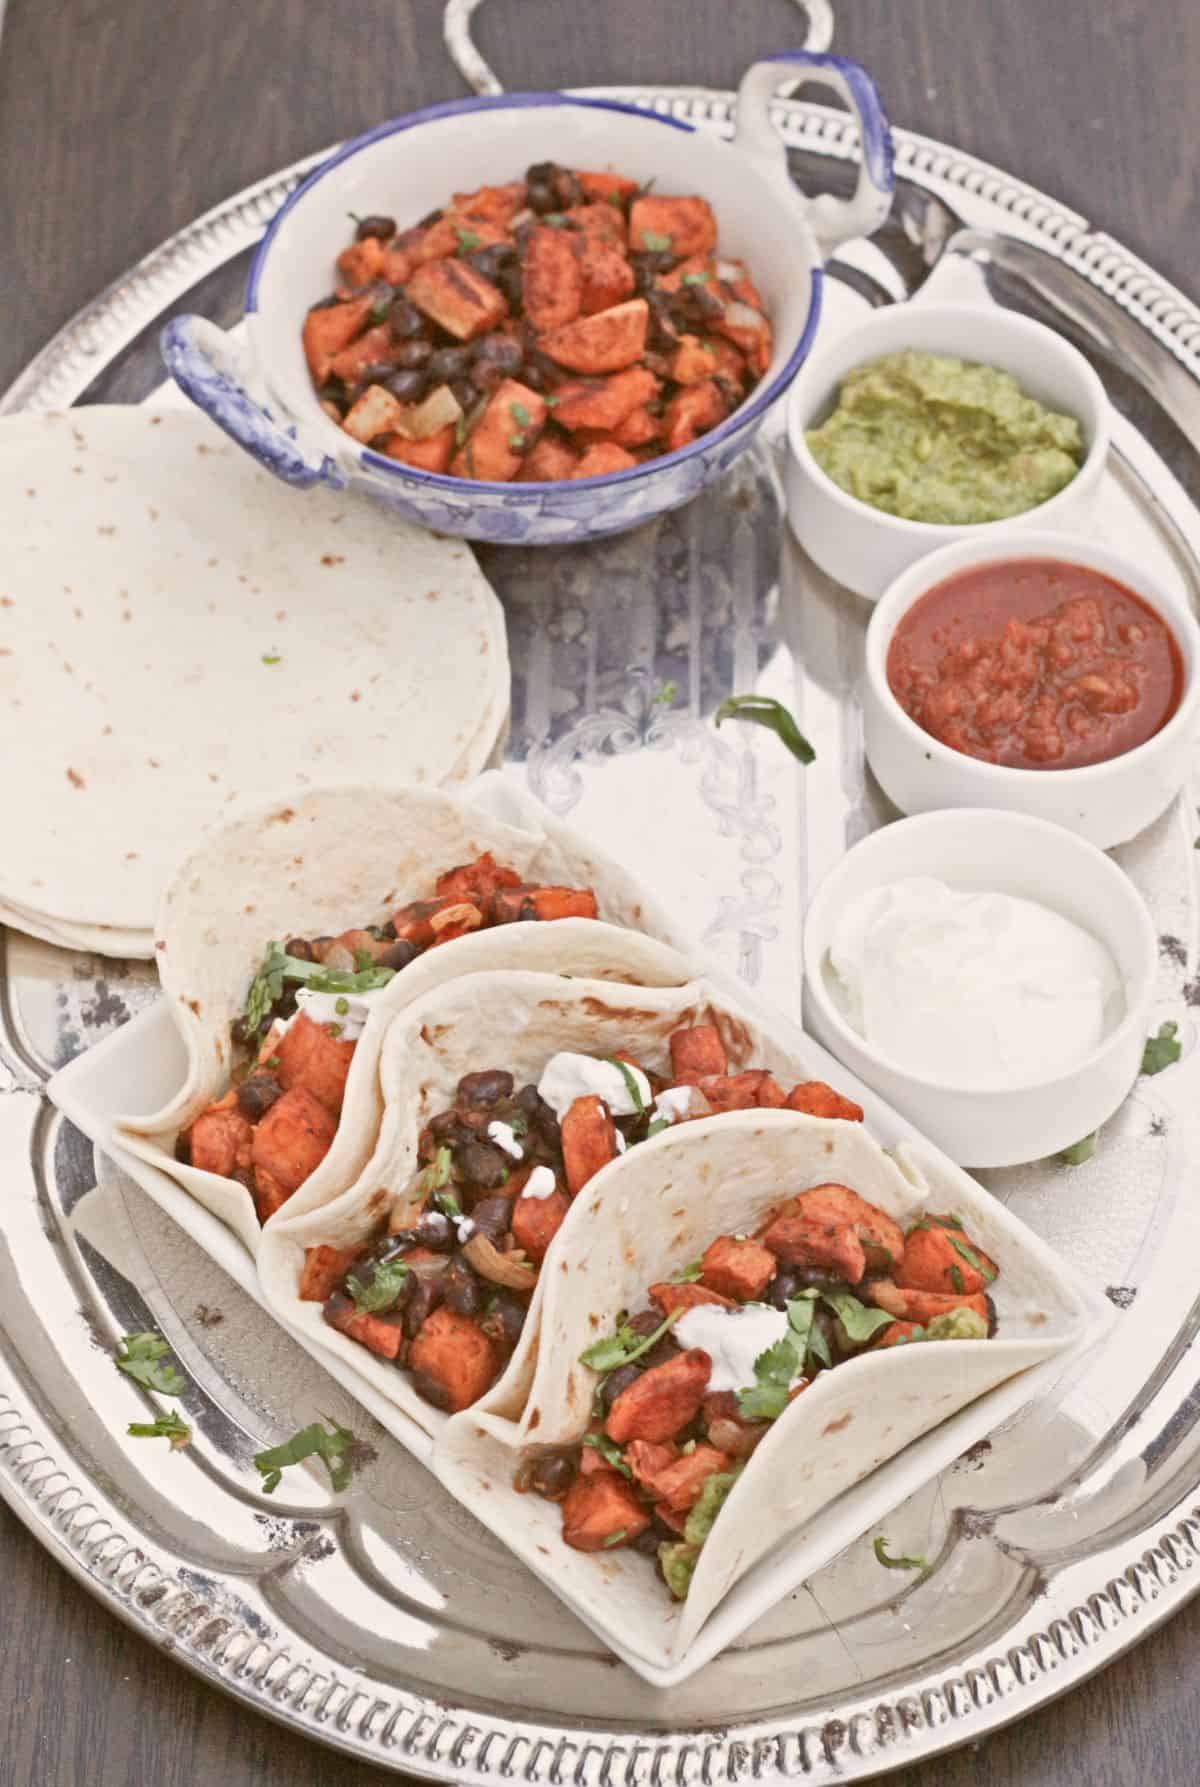 Soft tacos filled with black beans and sweet potatoes in a tray with sides.